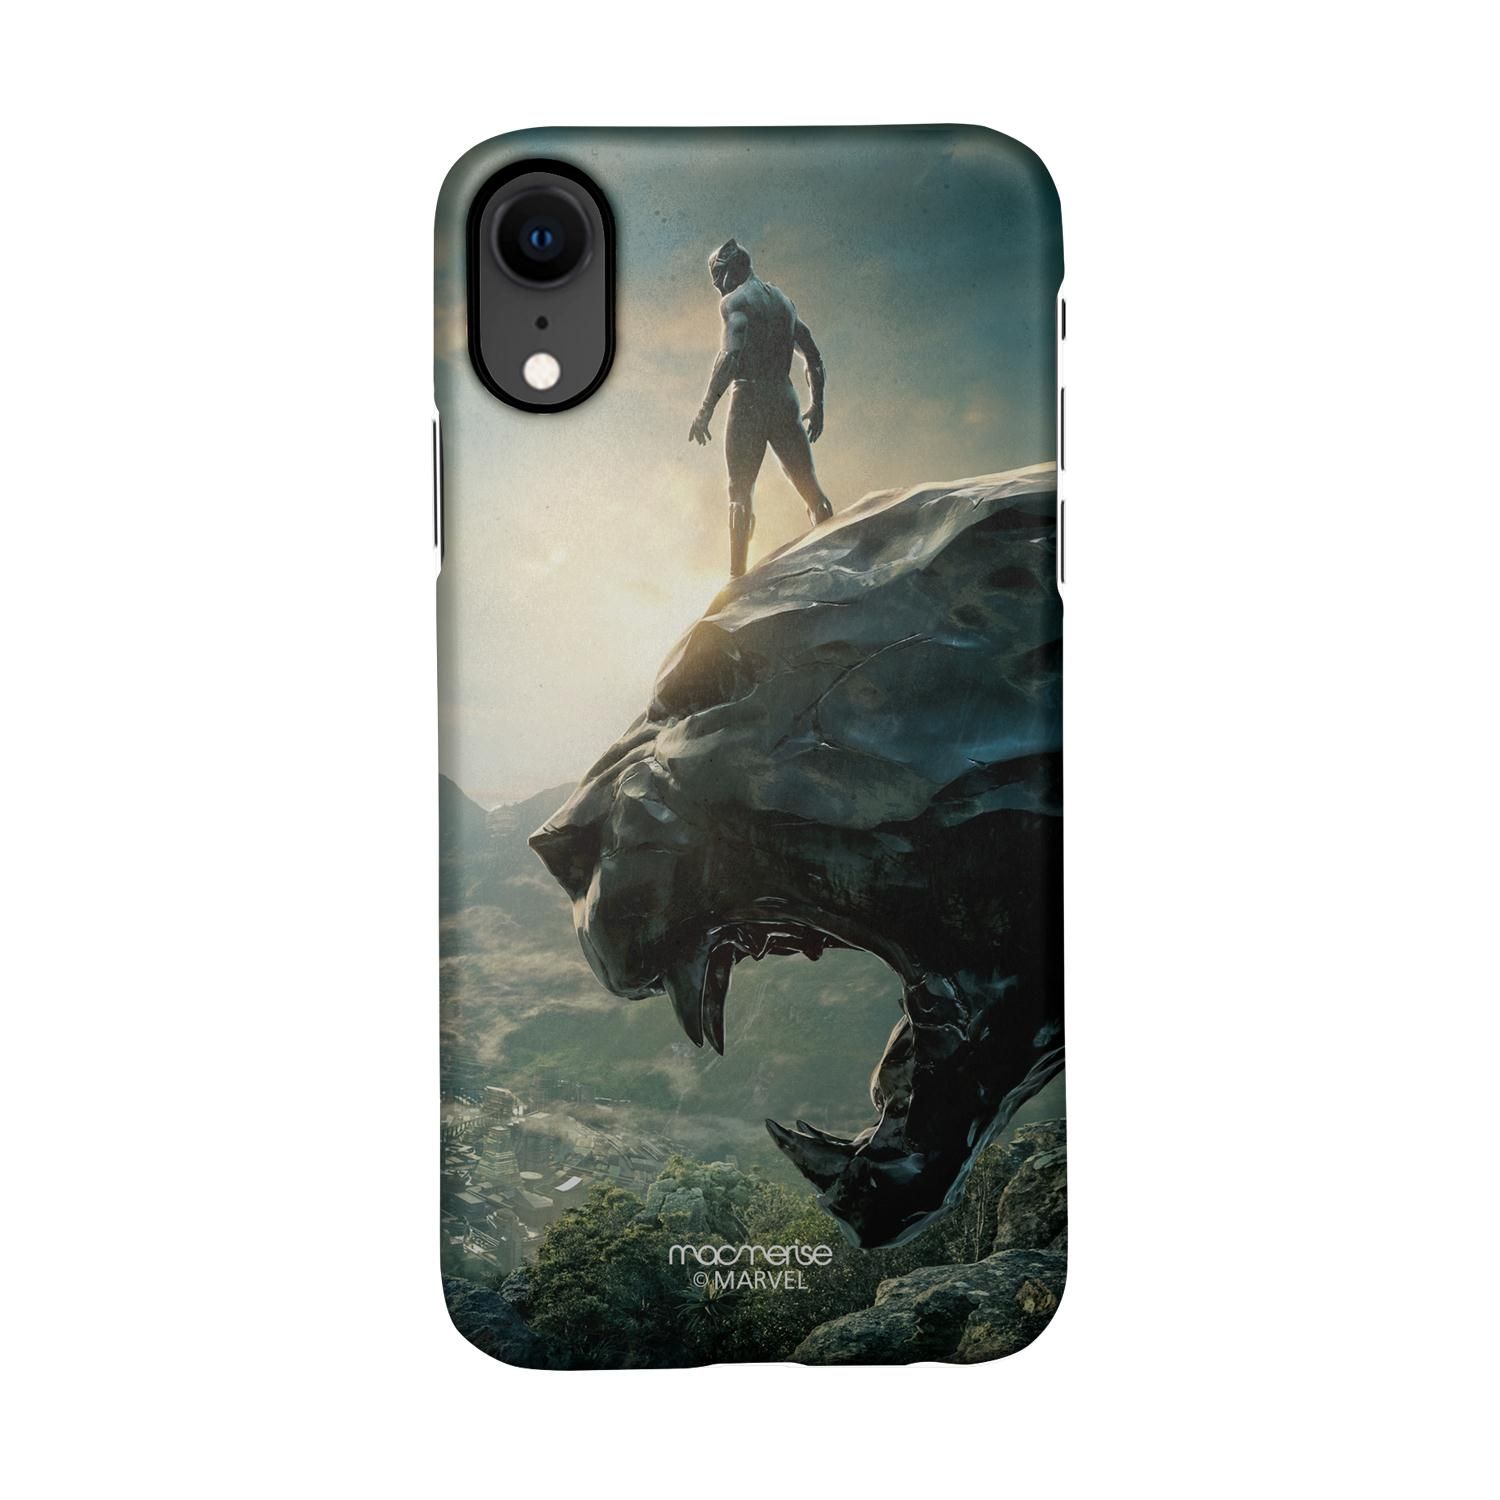 Buy Panther Glorified - Sleek Phone Case for iPhone XR Online